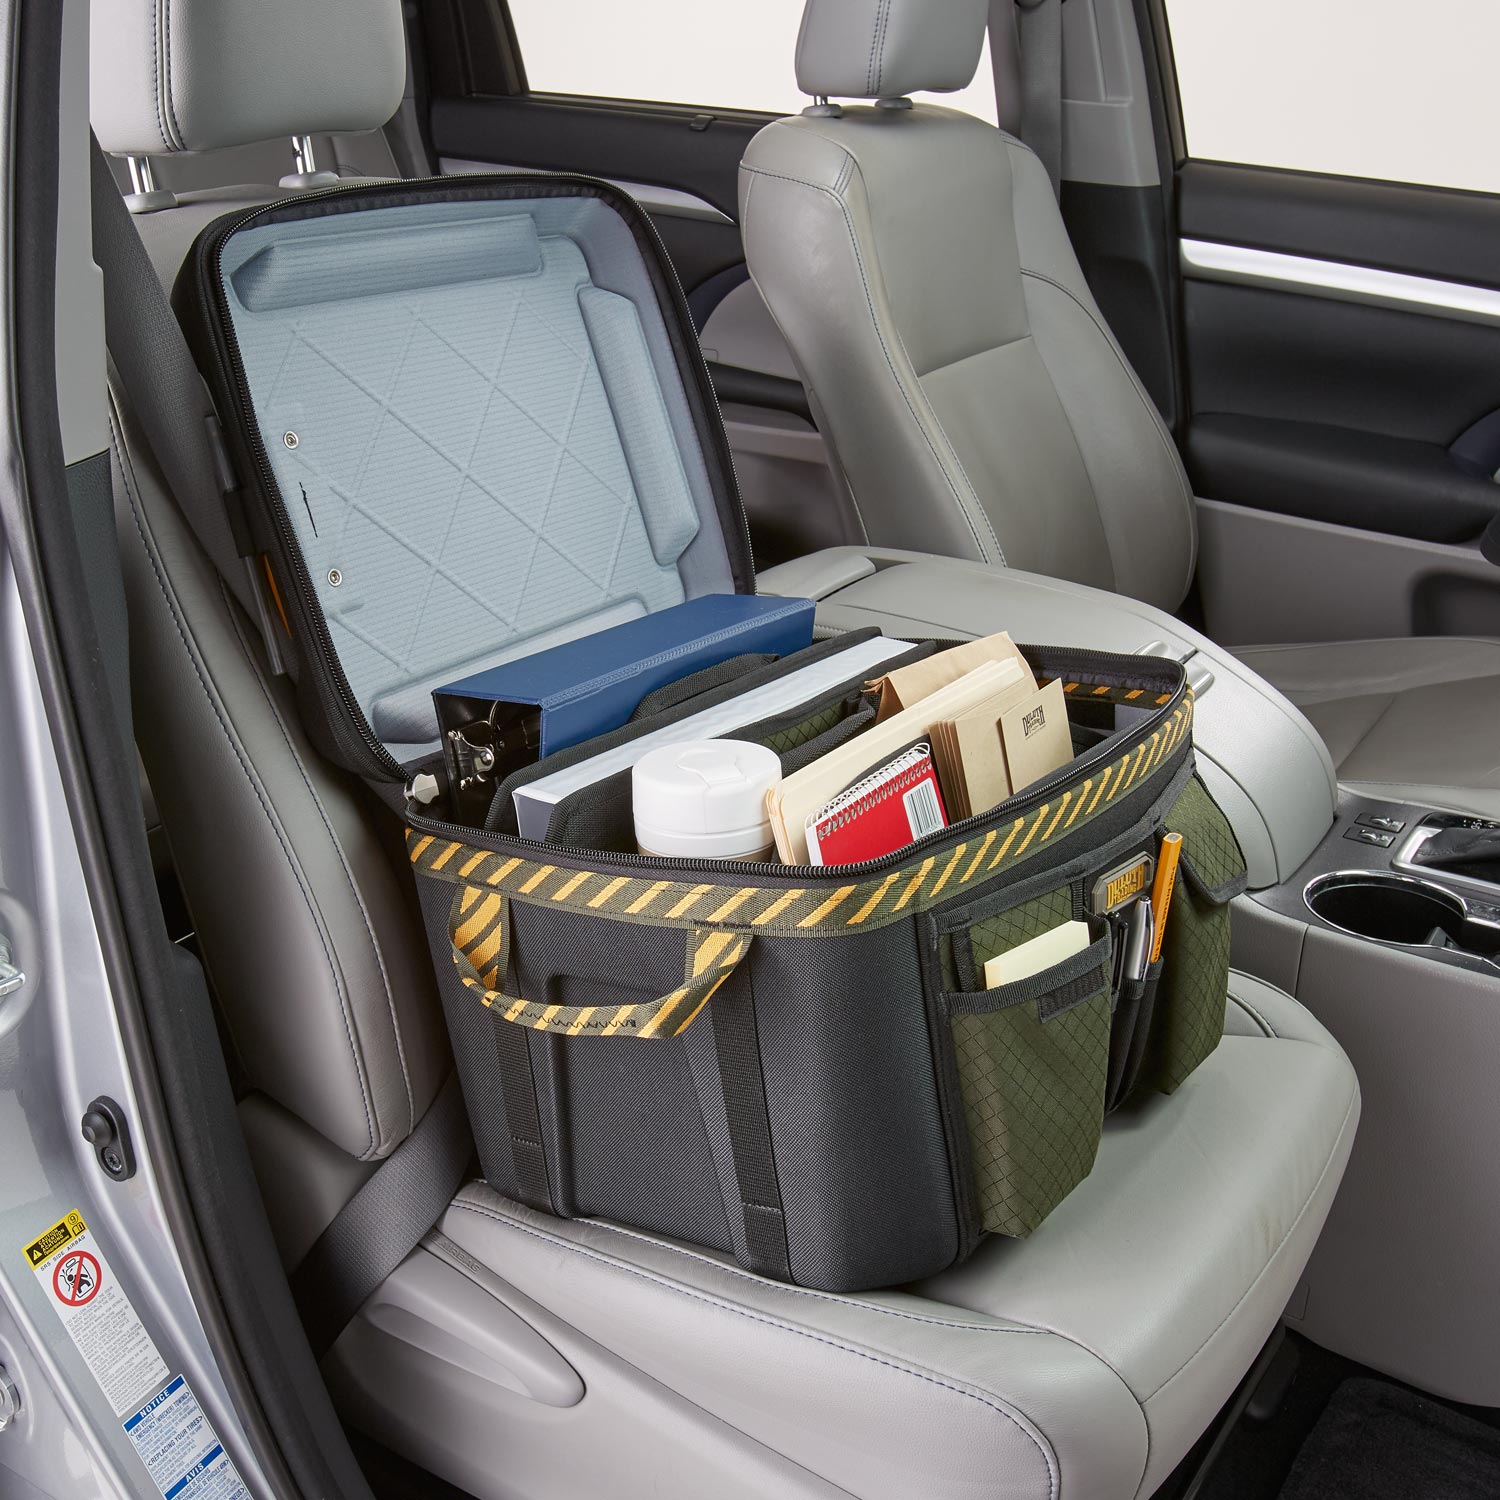 CarGo 300 Car Desk - Mobile Office - Request a Quote